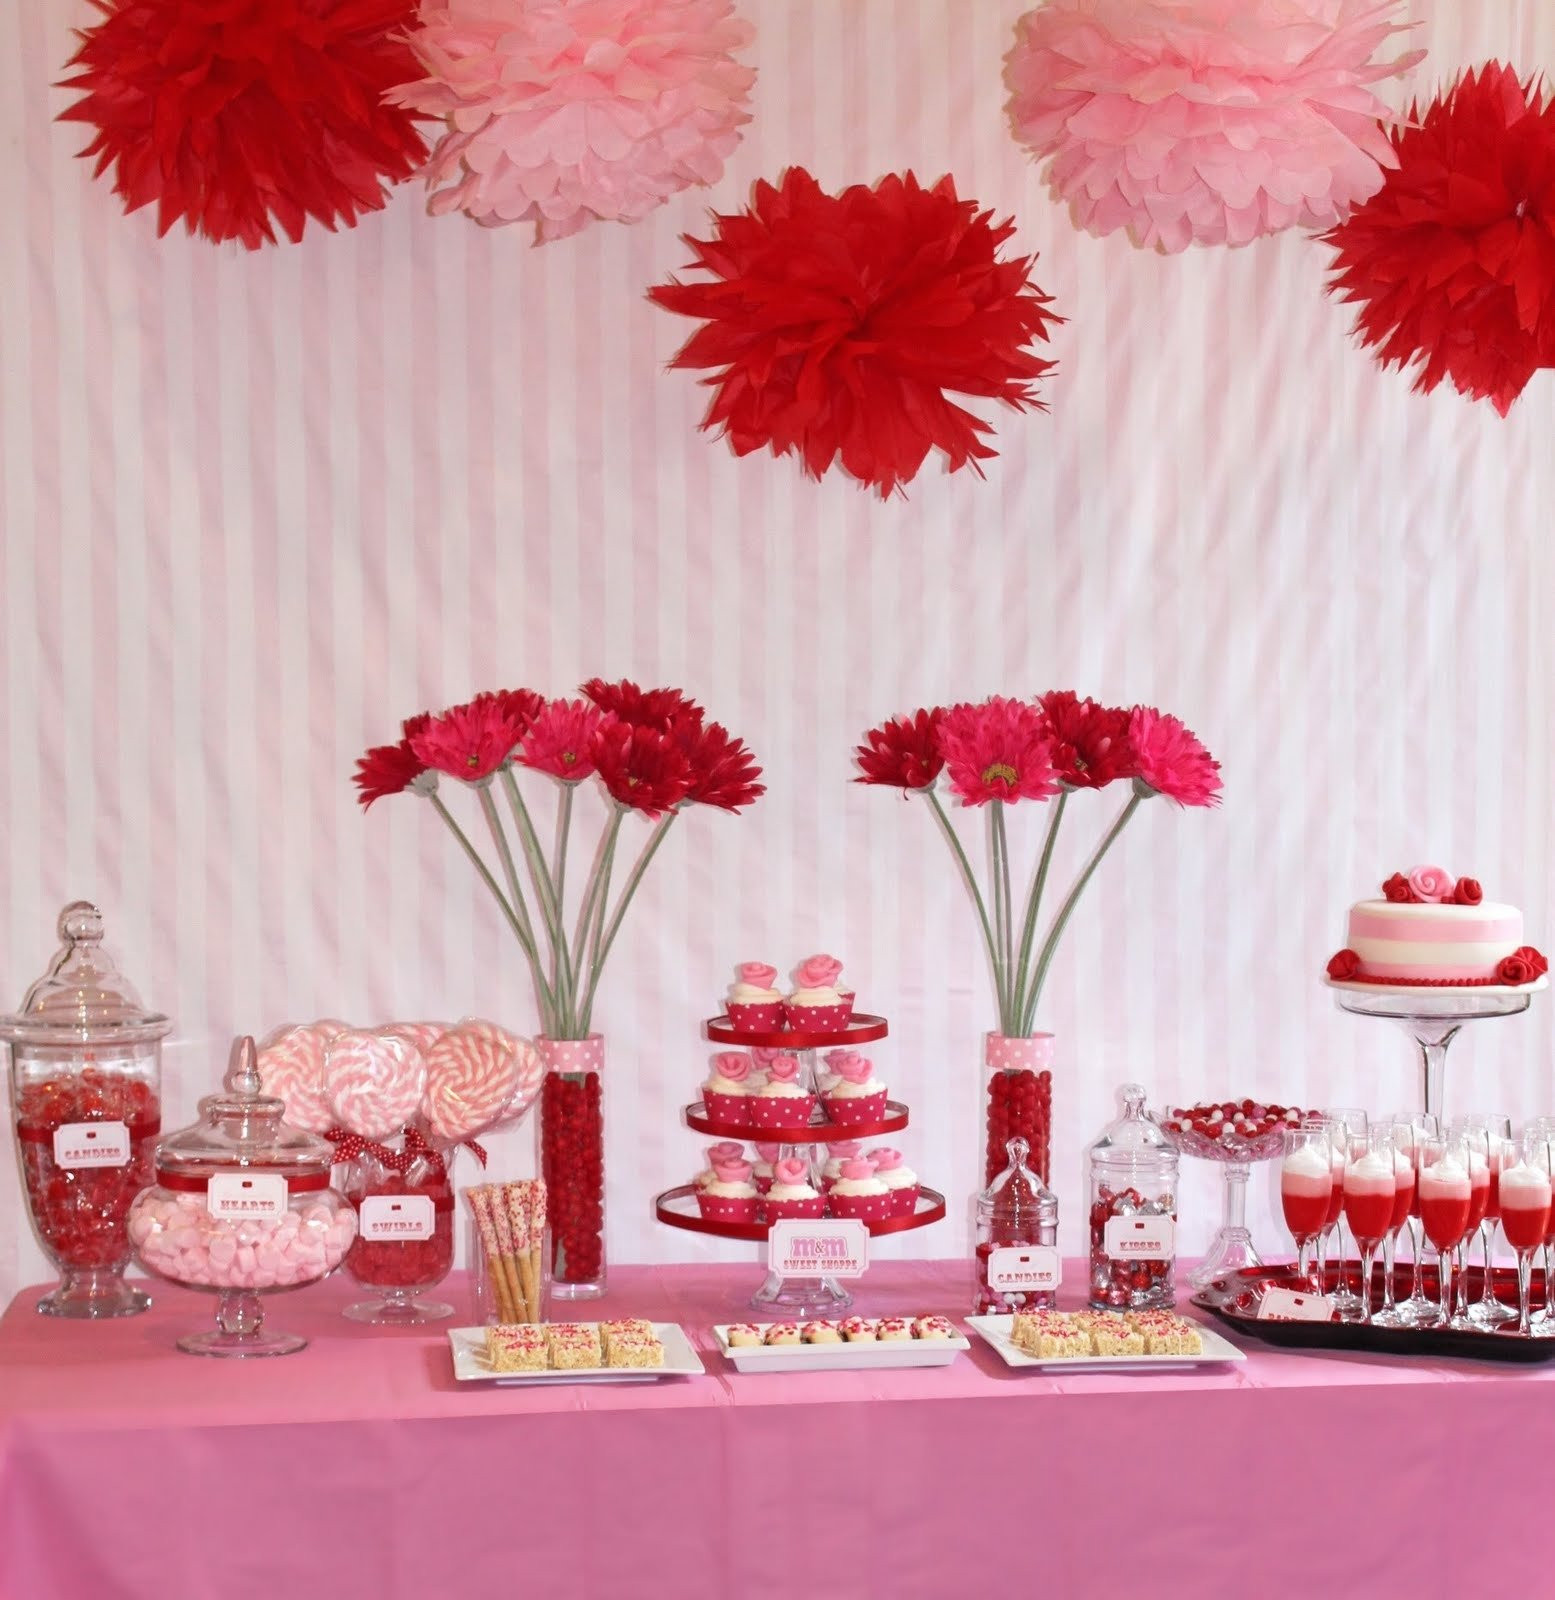 Valentines Day Party Ideas for Adults New 10 Unique Valentine Day Party Ideas for Adults 2020